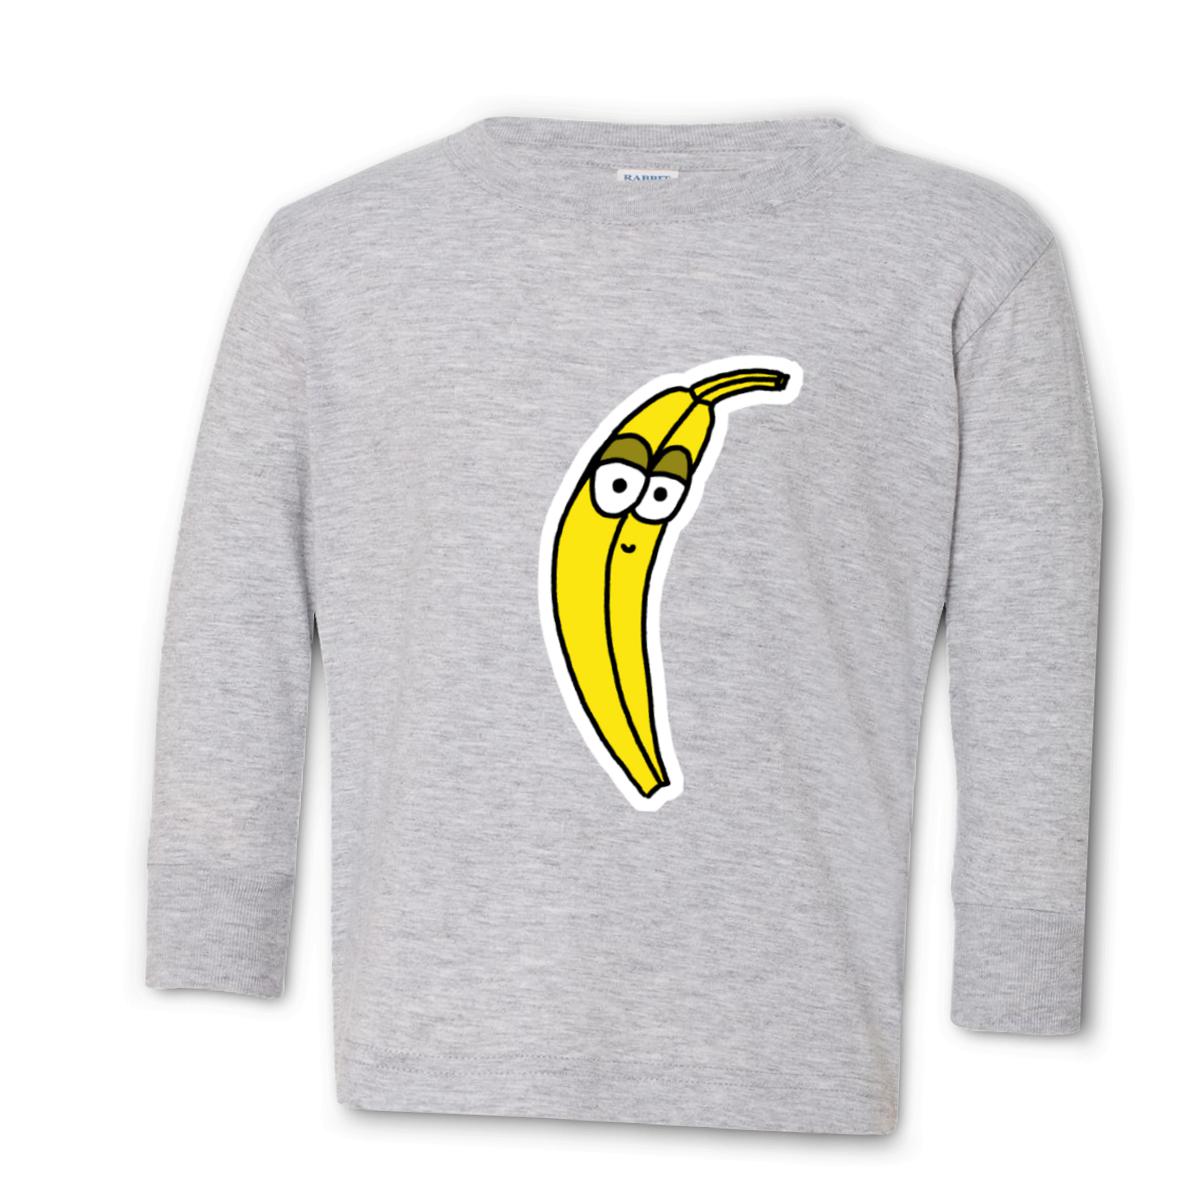 Plantain Toddler Long Sleeve Tee 2T heather